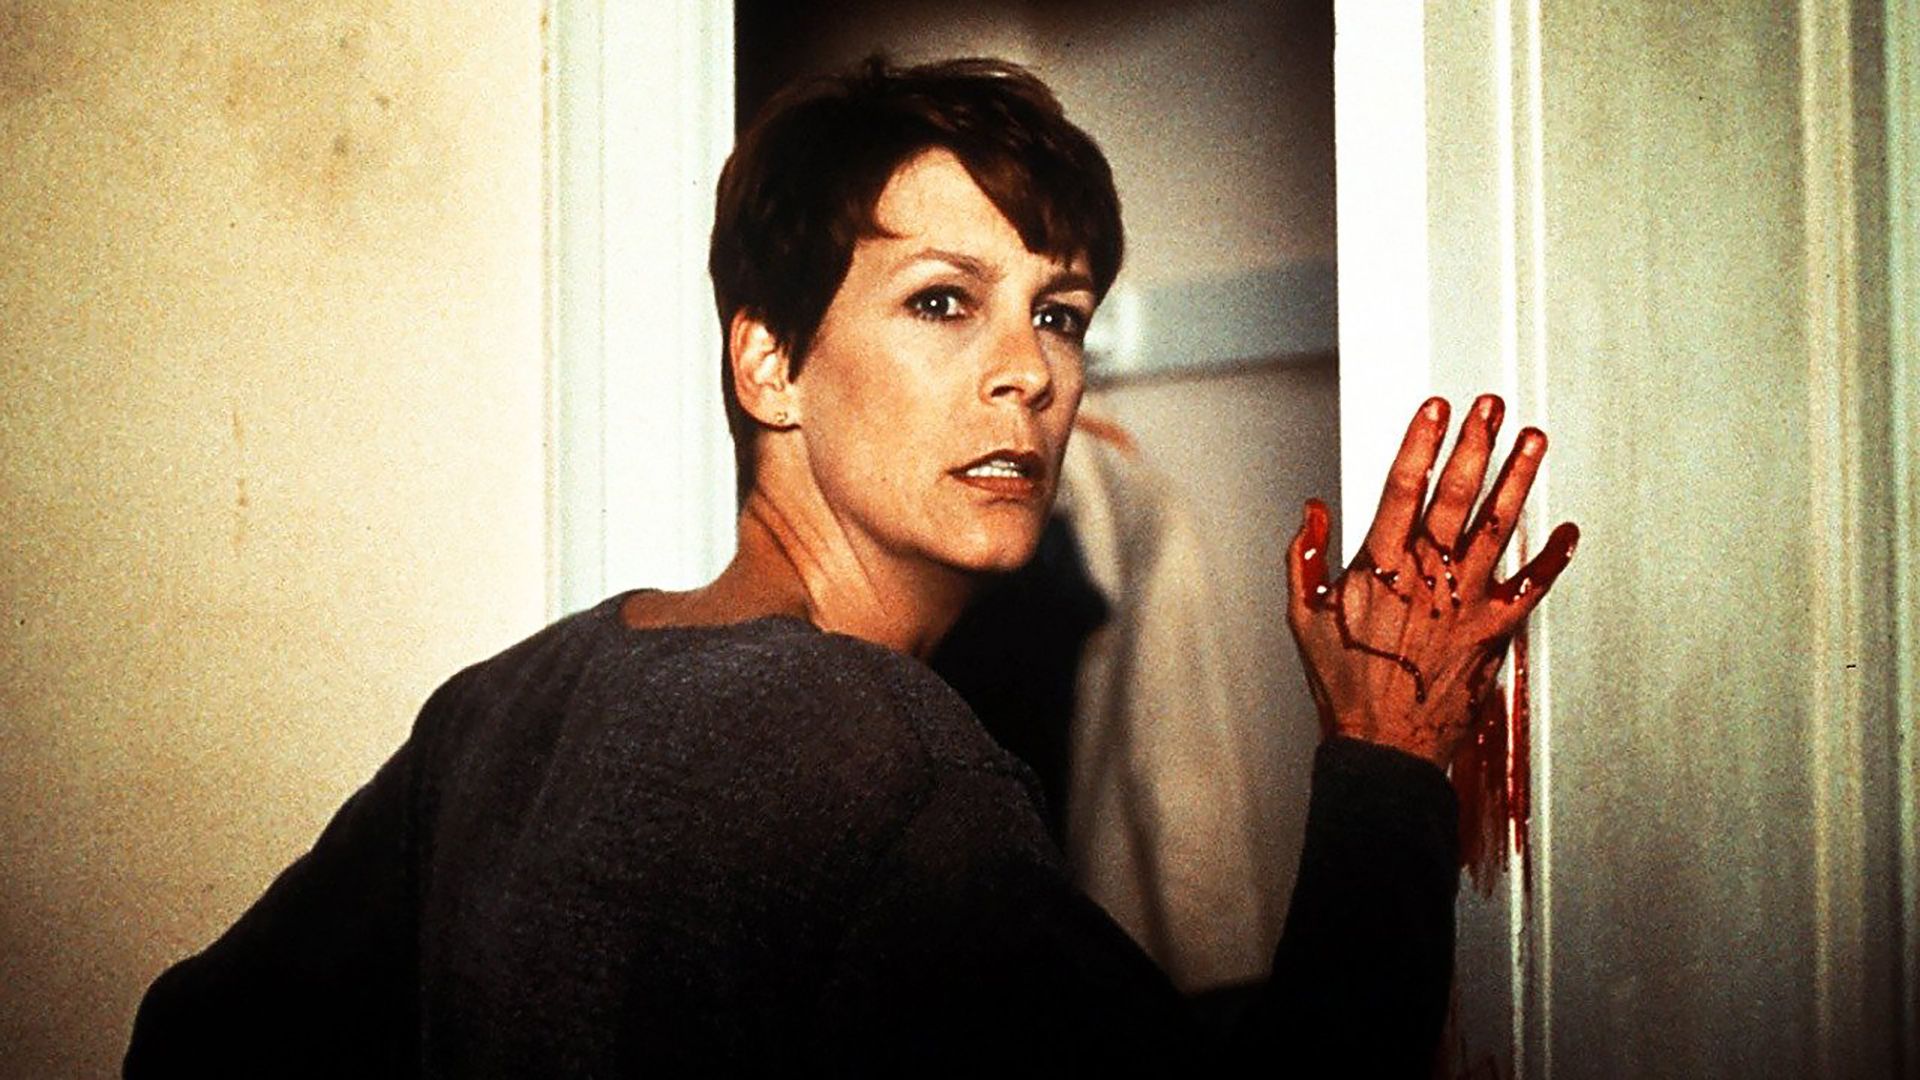 Jamie Lee Curtis in the movie 'Halloween H20: 20 Years Later'